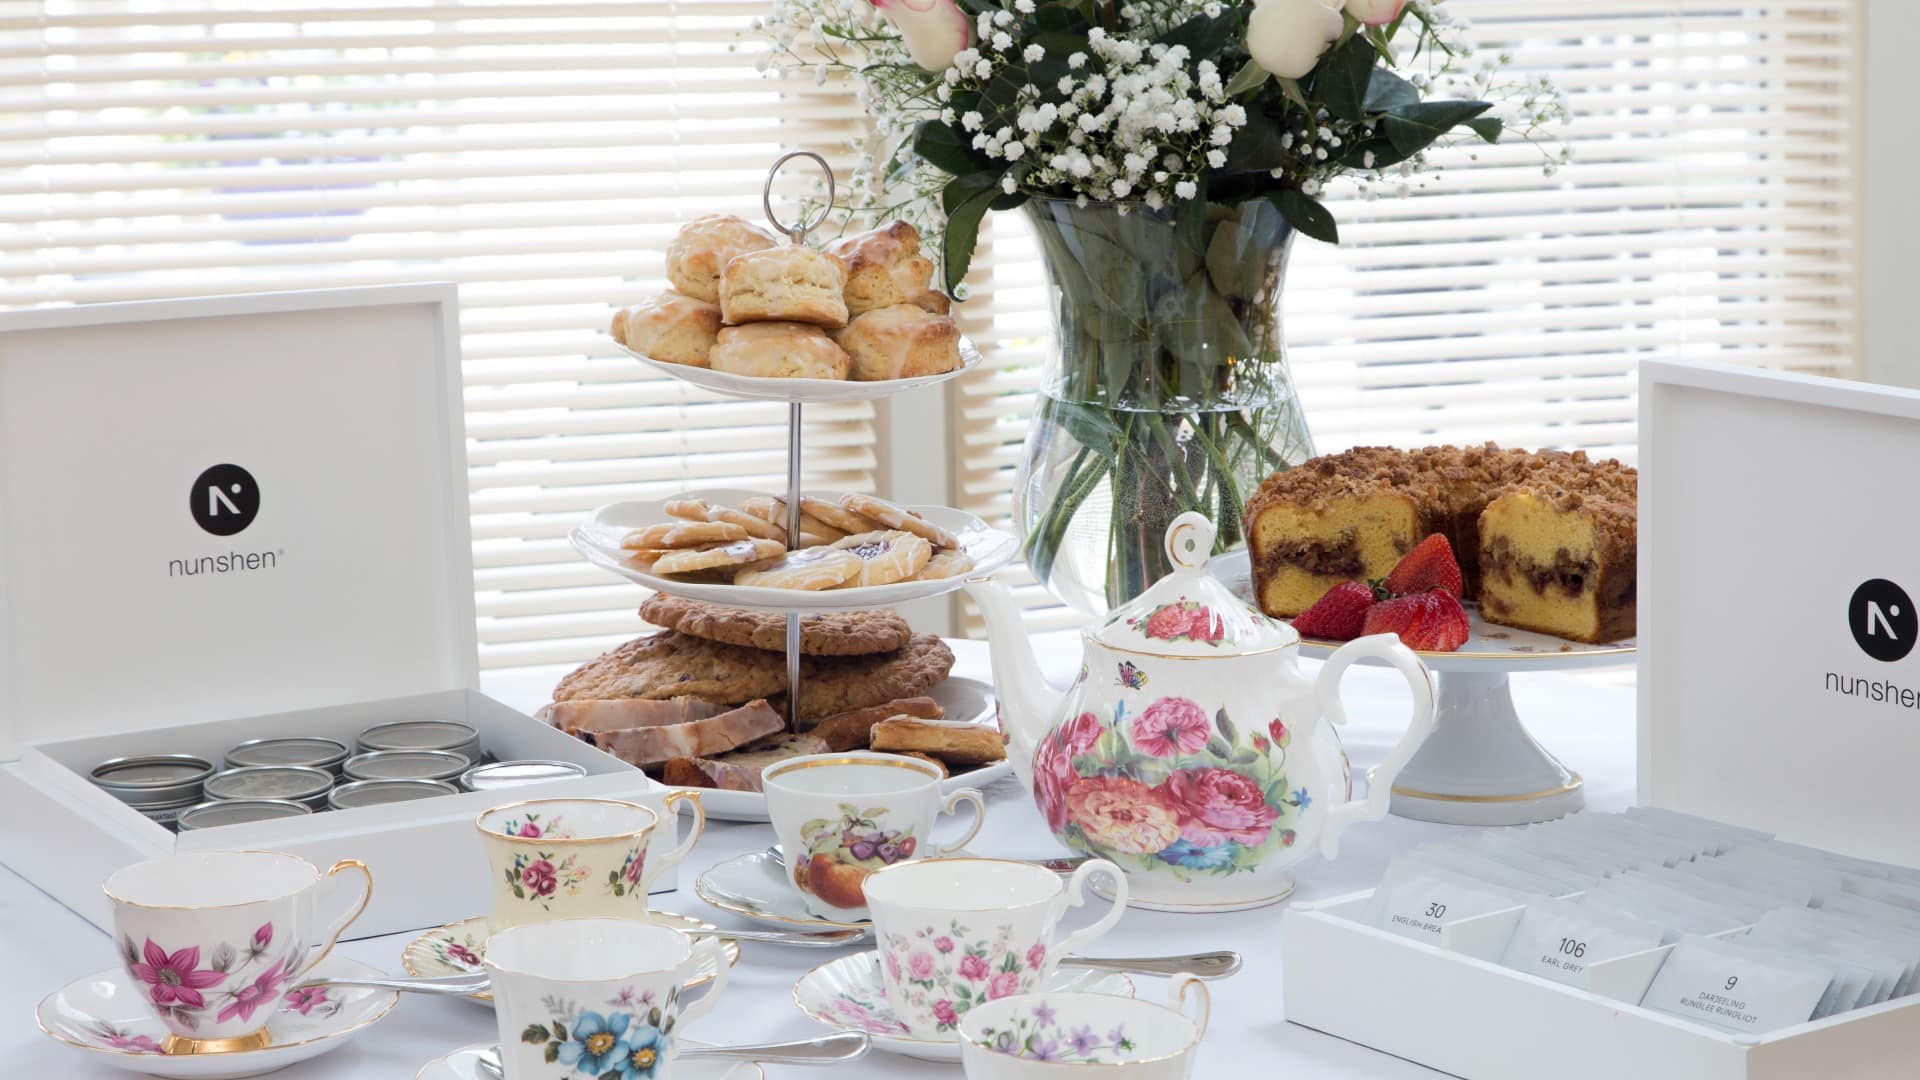 Table set for tea with floral cups and pitcher, vase of flowers and tower with baked goods